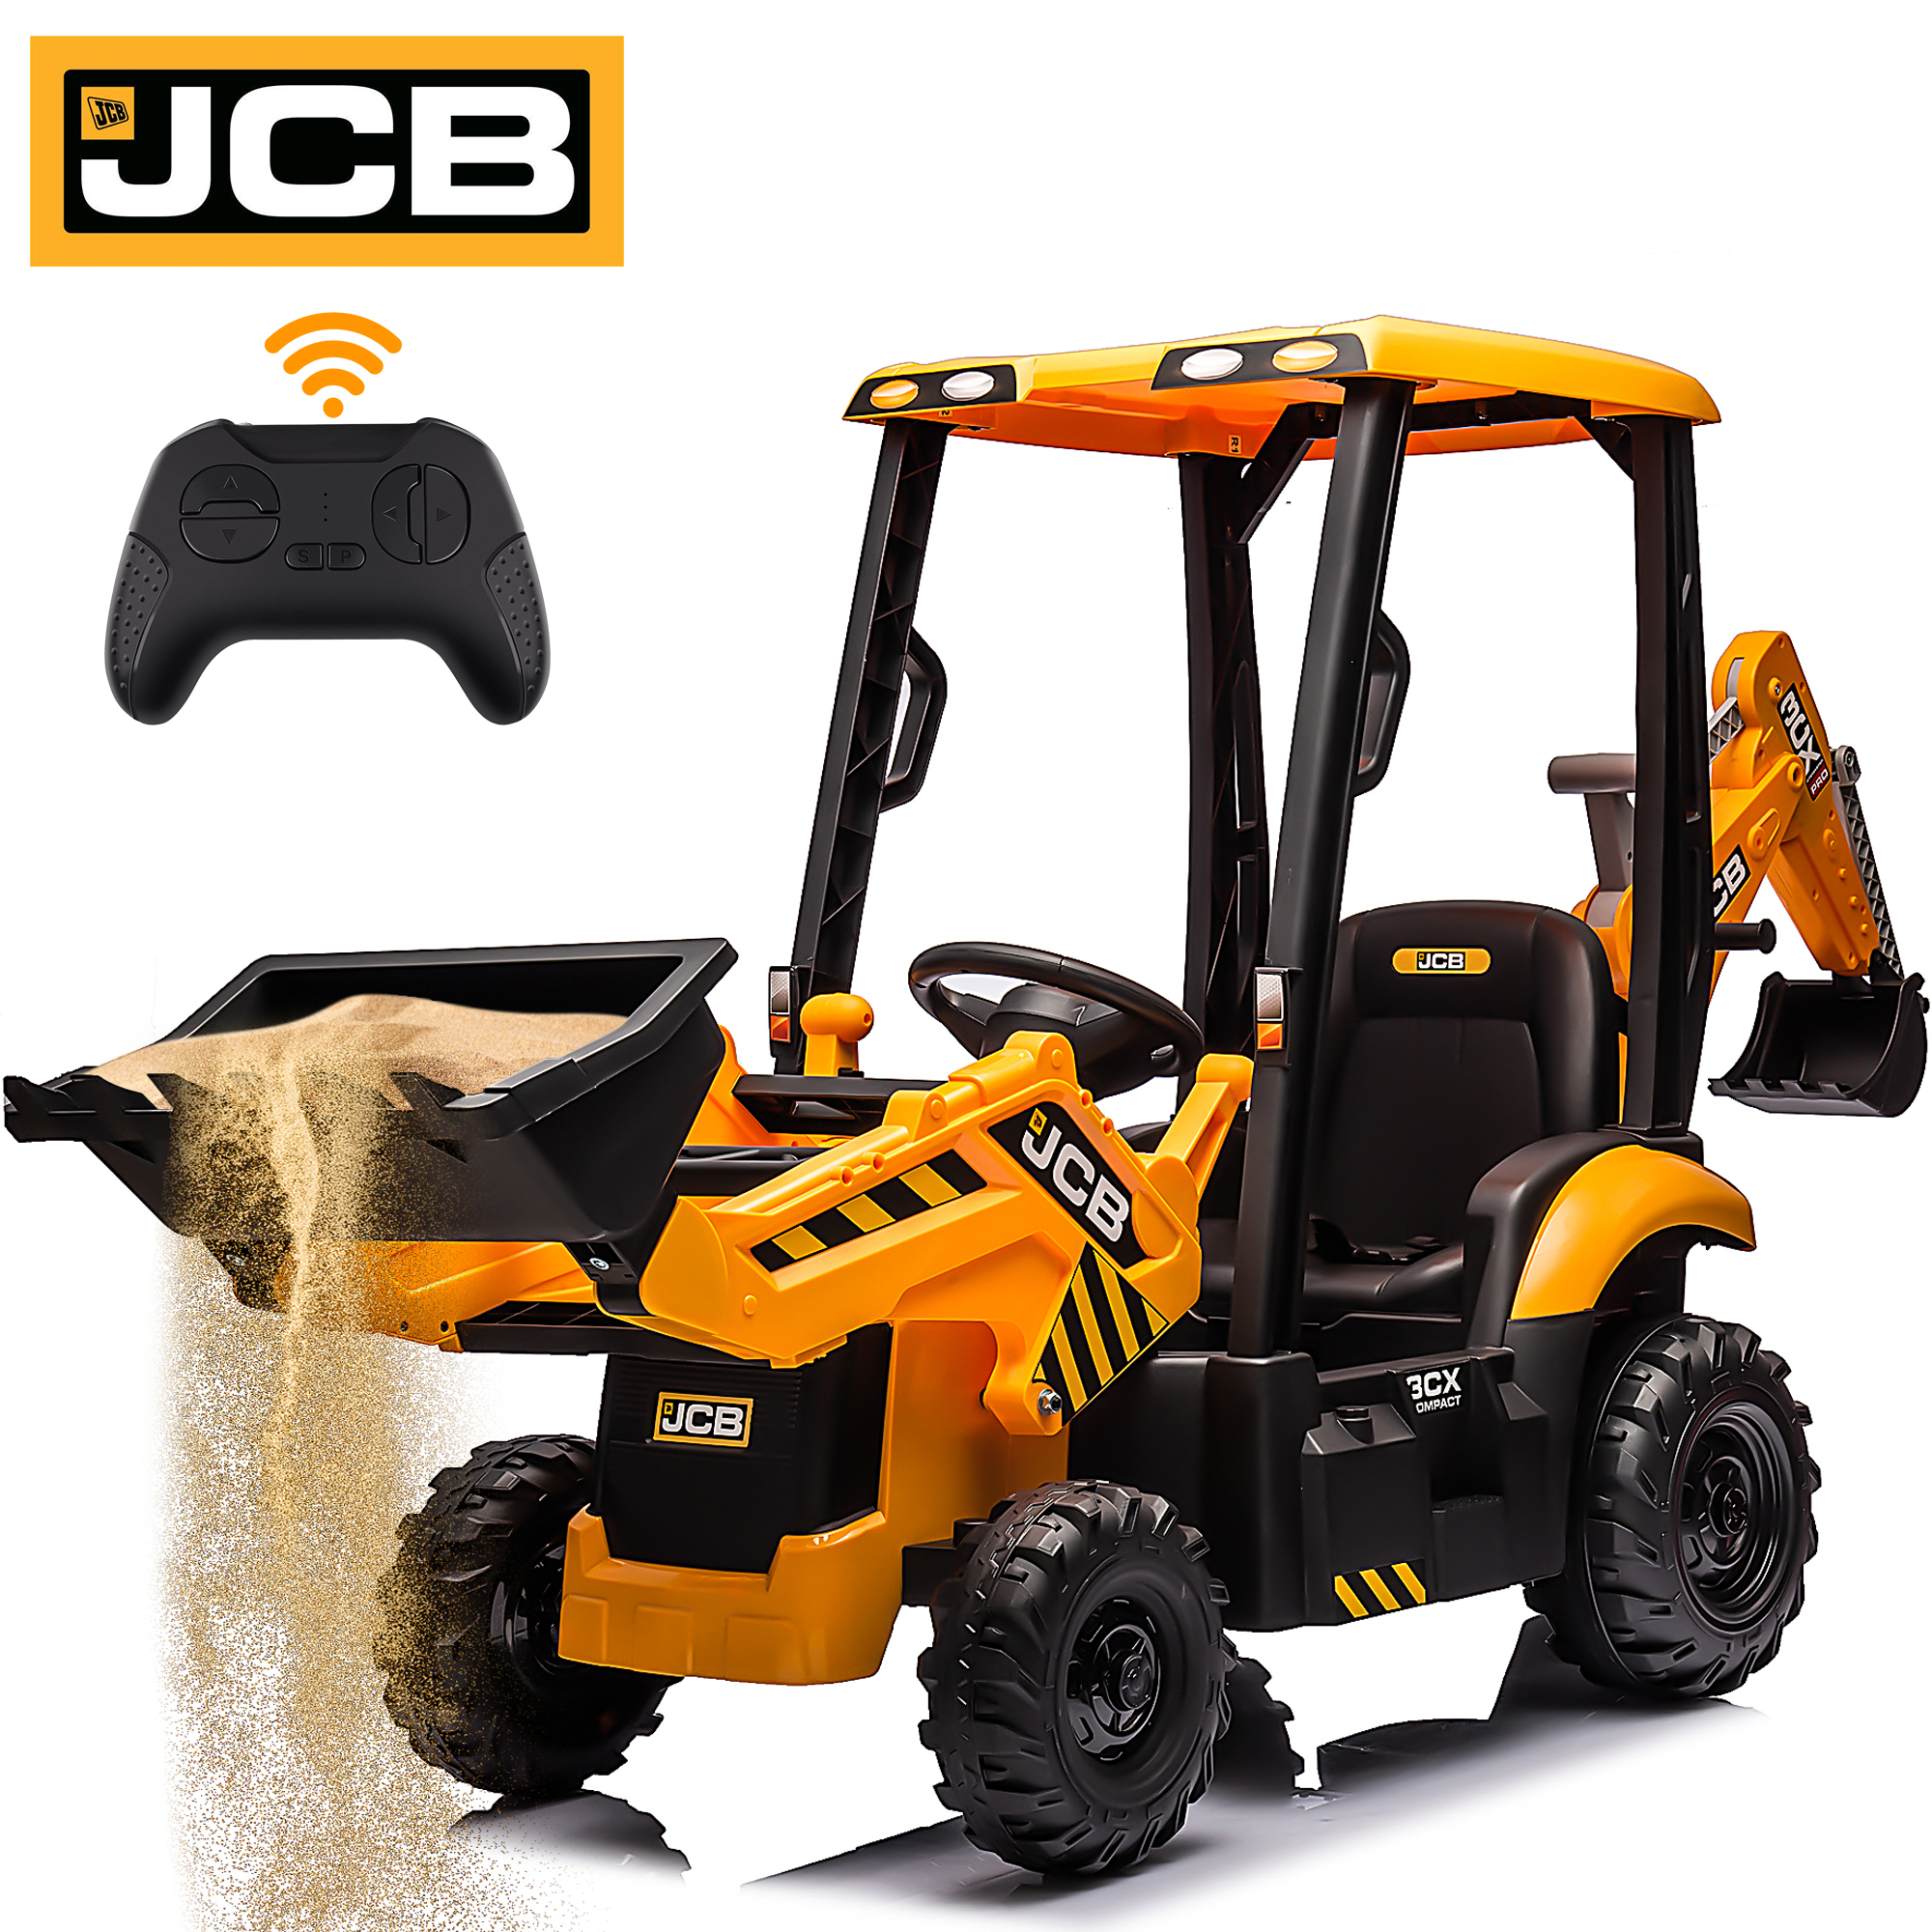 JCB 12V Ride on Excavator Digger, 4in1 Kids Ride on Toy with Remote Control, Powered Electric Construction Tractor for 3-6 Years Old Boys Girls Toddlers, Ajustable Front and Back Loader, Yellow - image 1 of 10